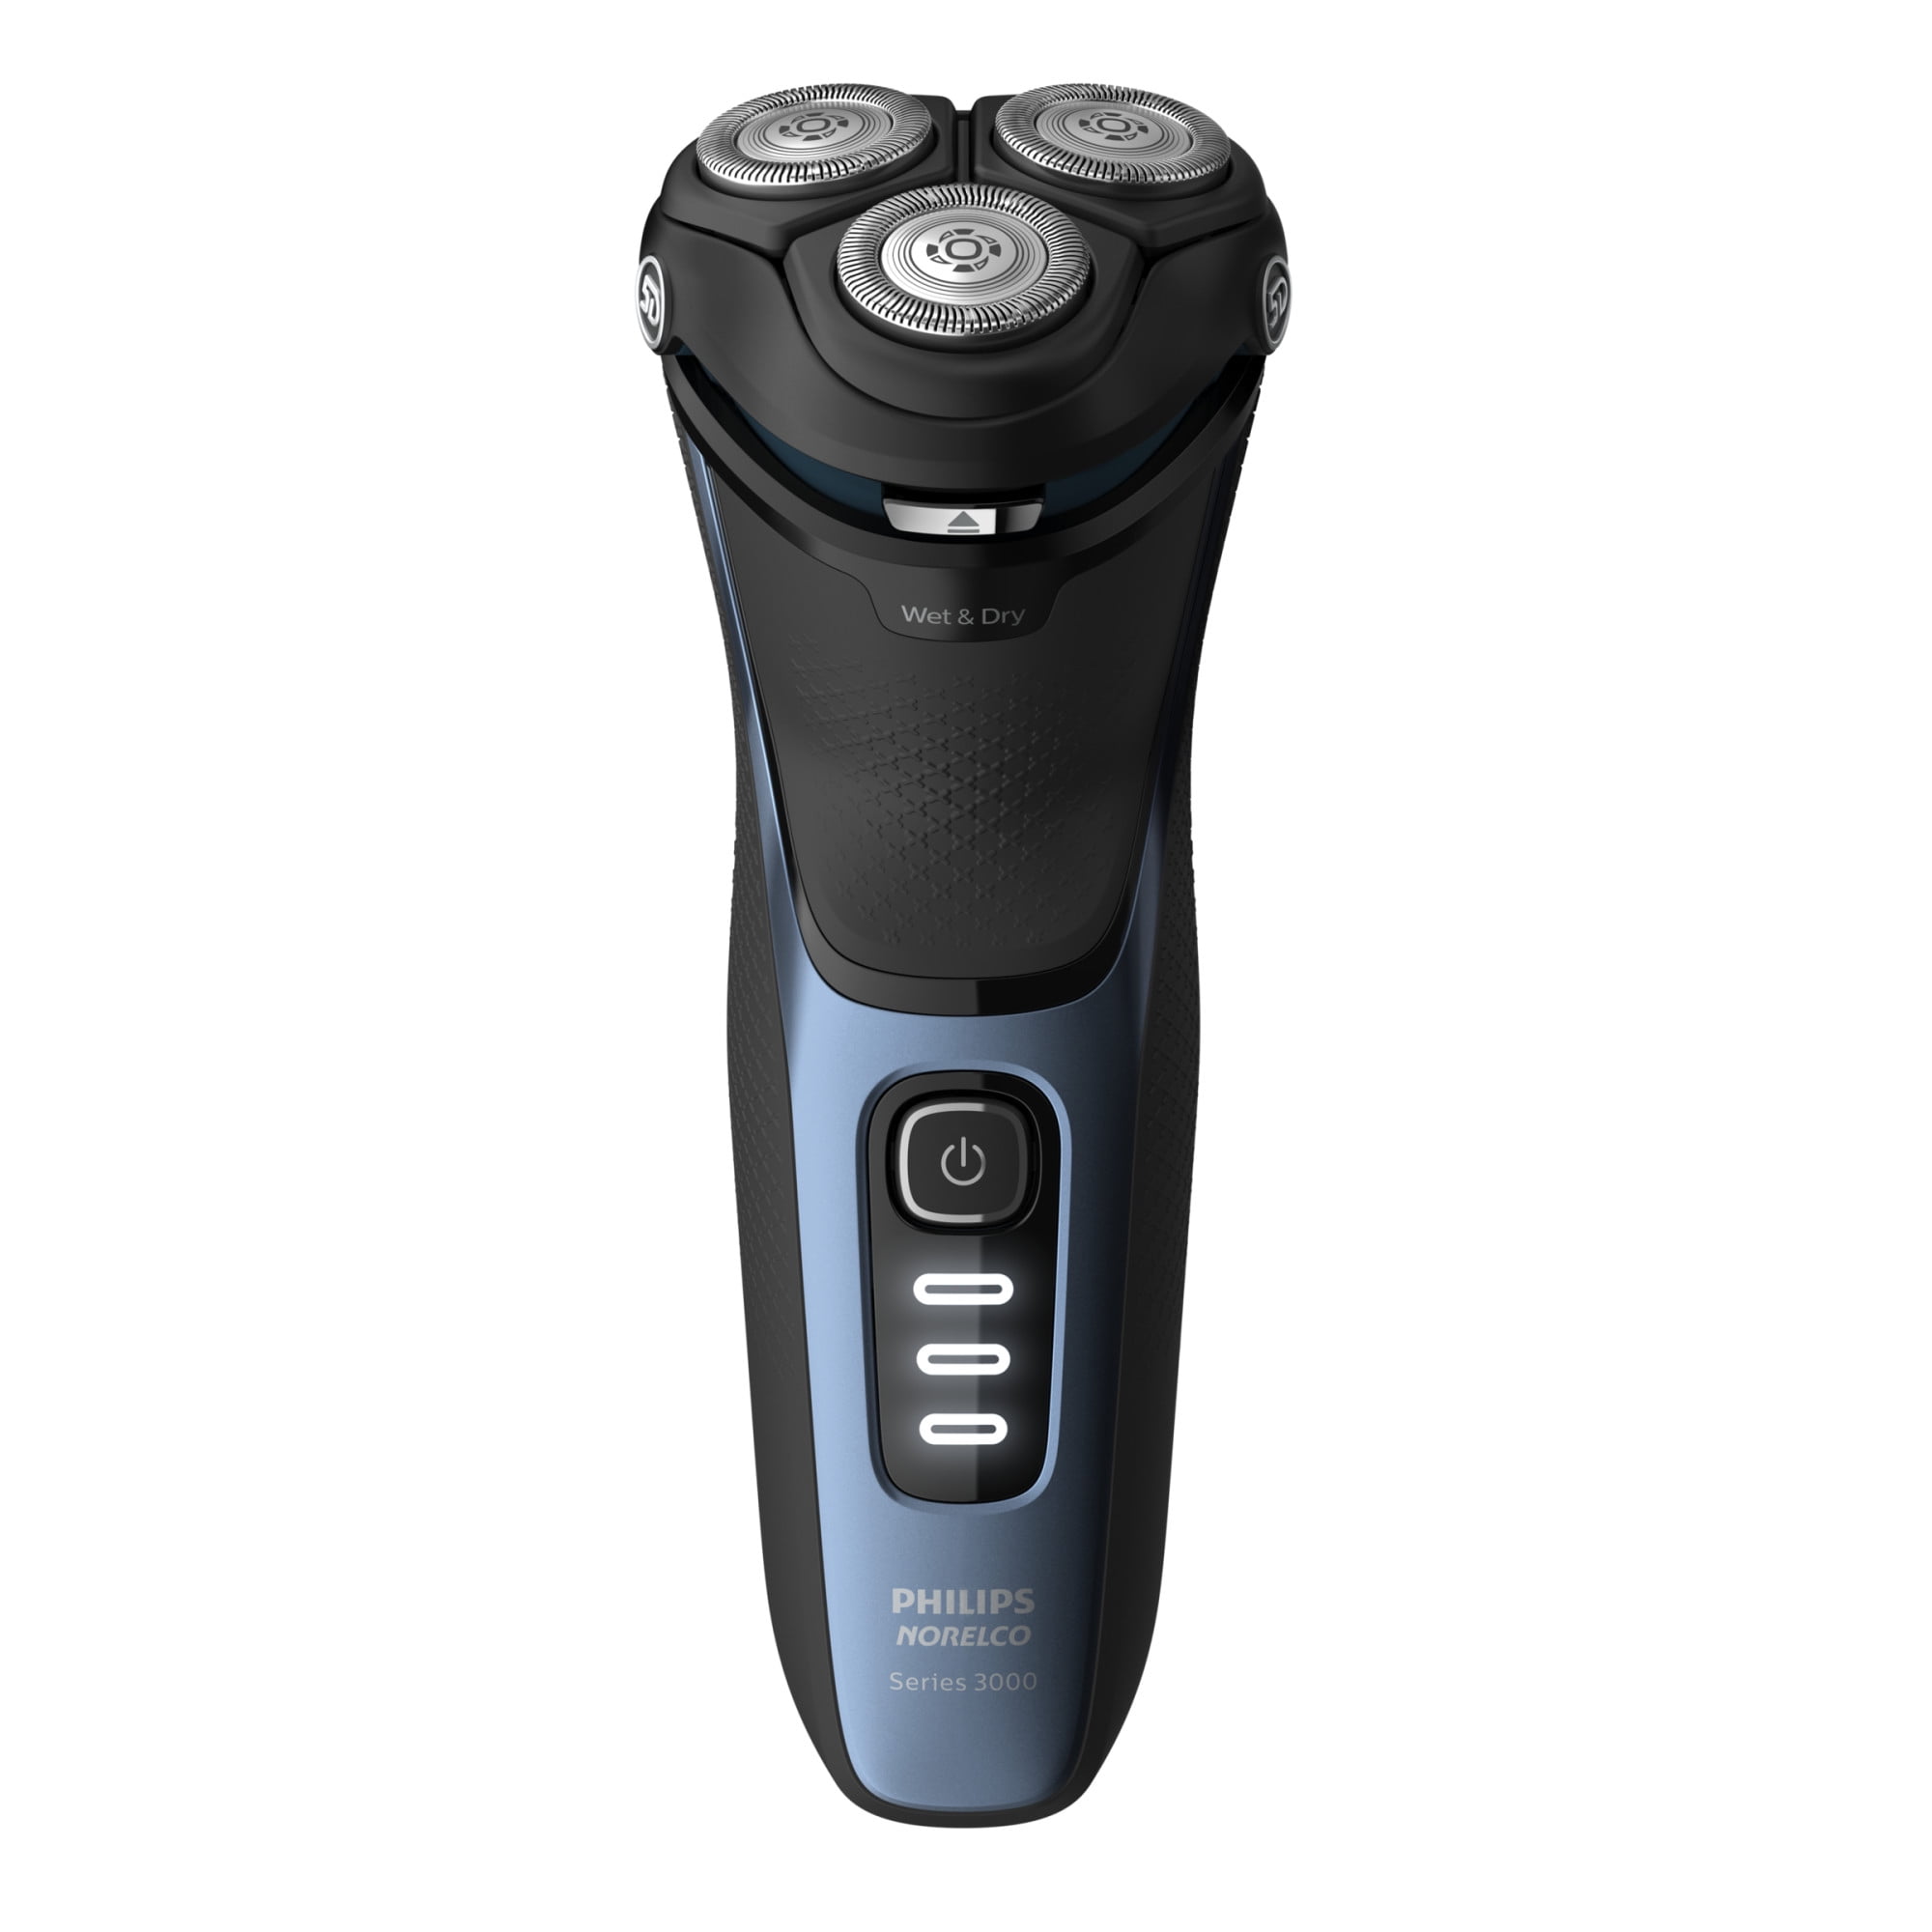 complexity Equivalent Viscous Philips Norelco Shaver 3500, Rechargeable Wet & Dry Electric Shaver with  Pop-Up Trimmer and Storage Pouch, S3212/82 - Walmart.com